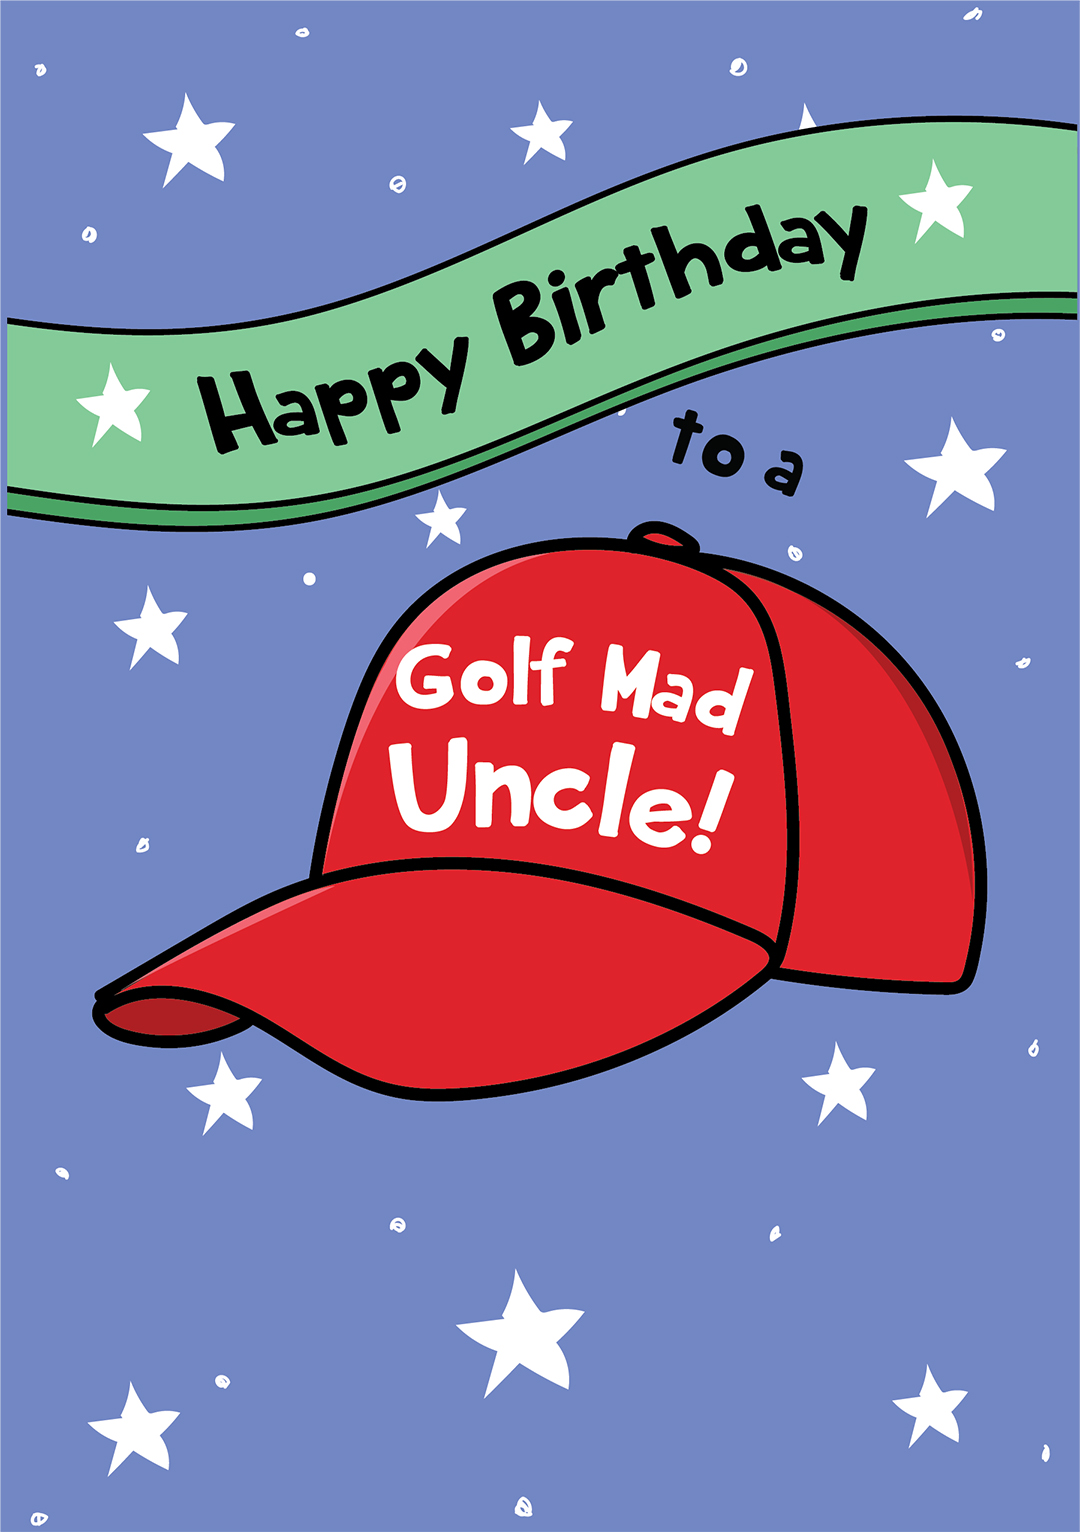 Happy Birthday To A Golf Mad Uncle!